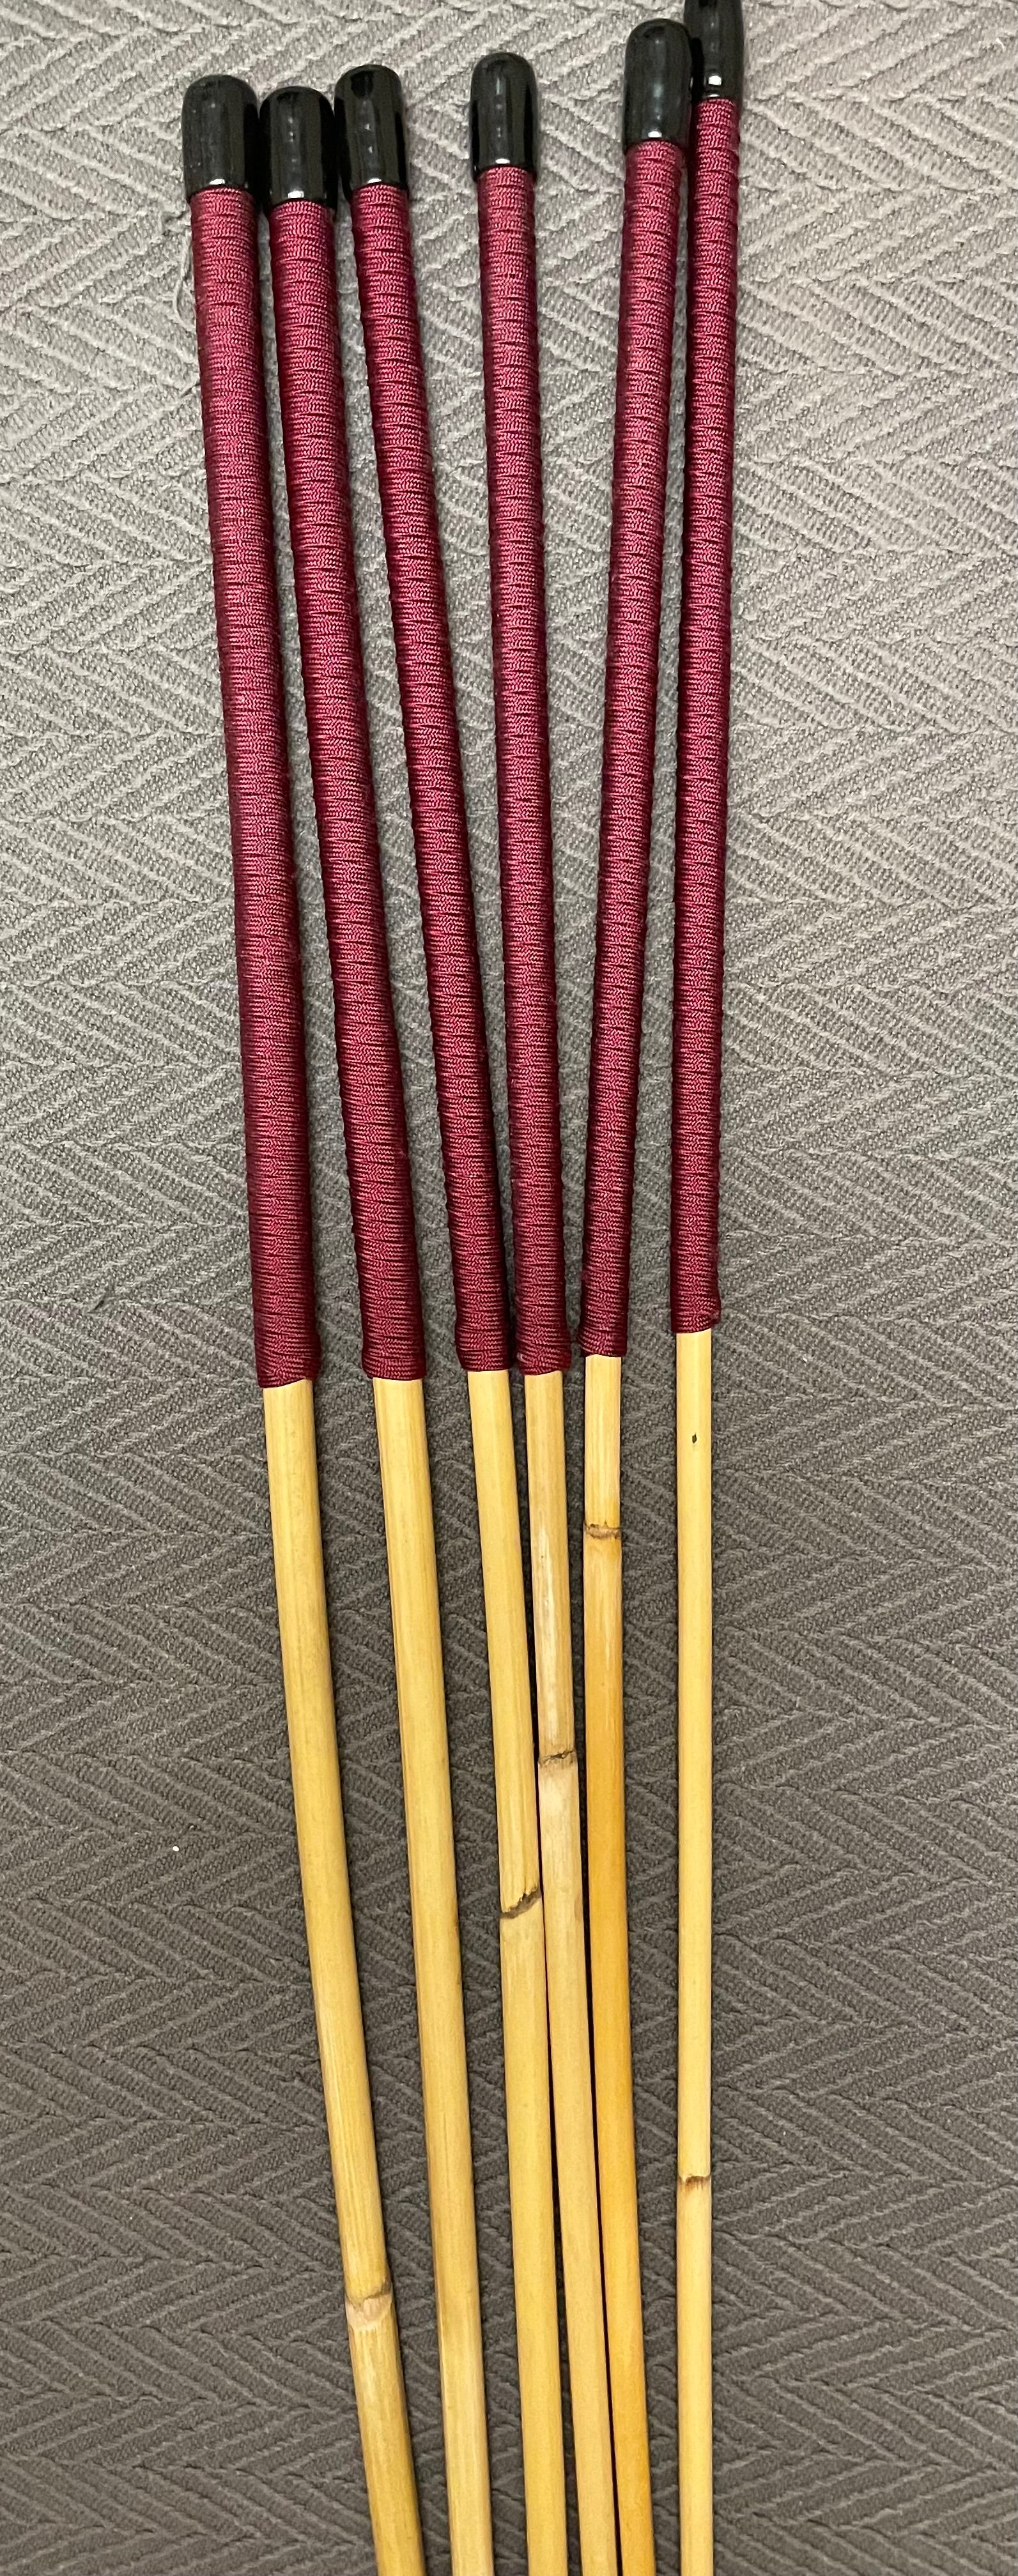 Set of 6 Classic Dragon Rattan Punishment Canes / School Canes  with Burgundy  Paracord Handles